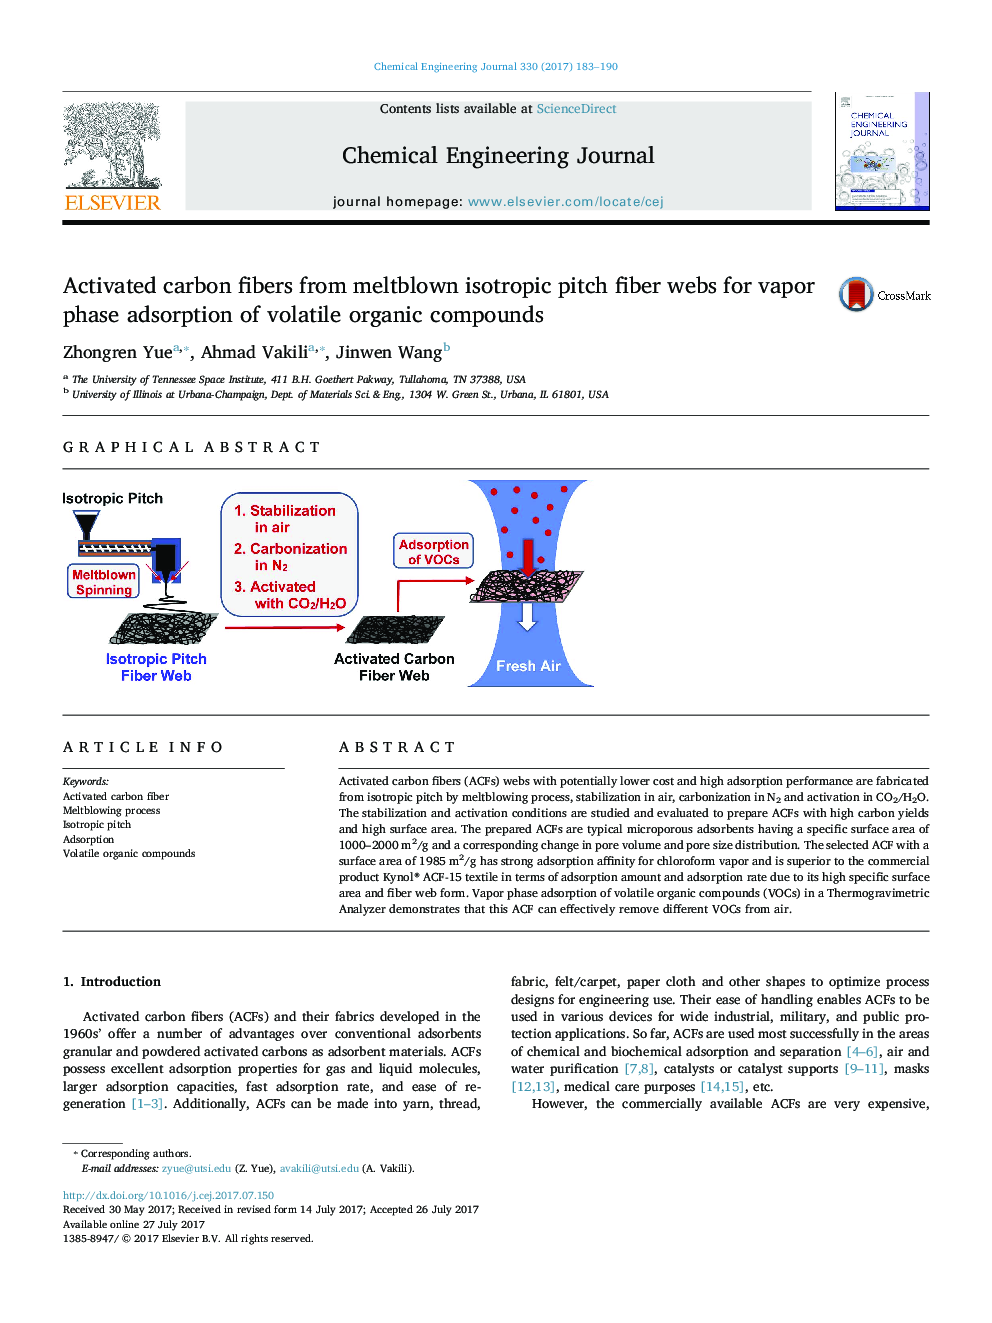 Activated carbon fibers from meltblown isotropic pitch fiber webs for vapor phase adsorption of volatile organic compounds